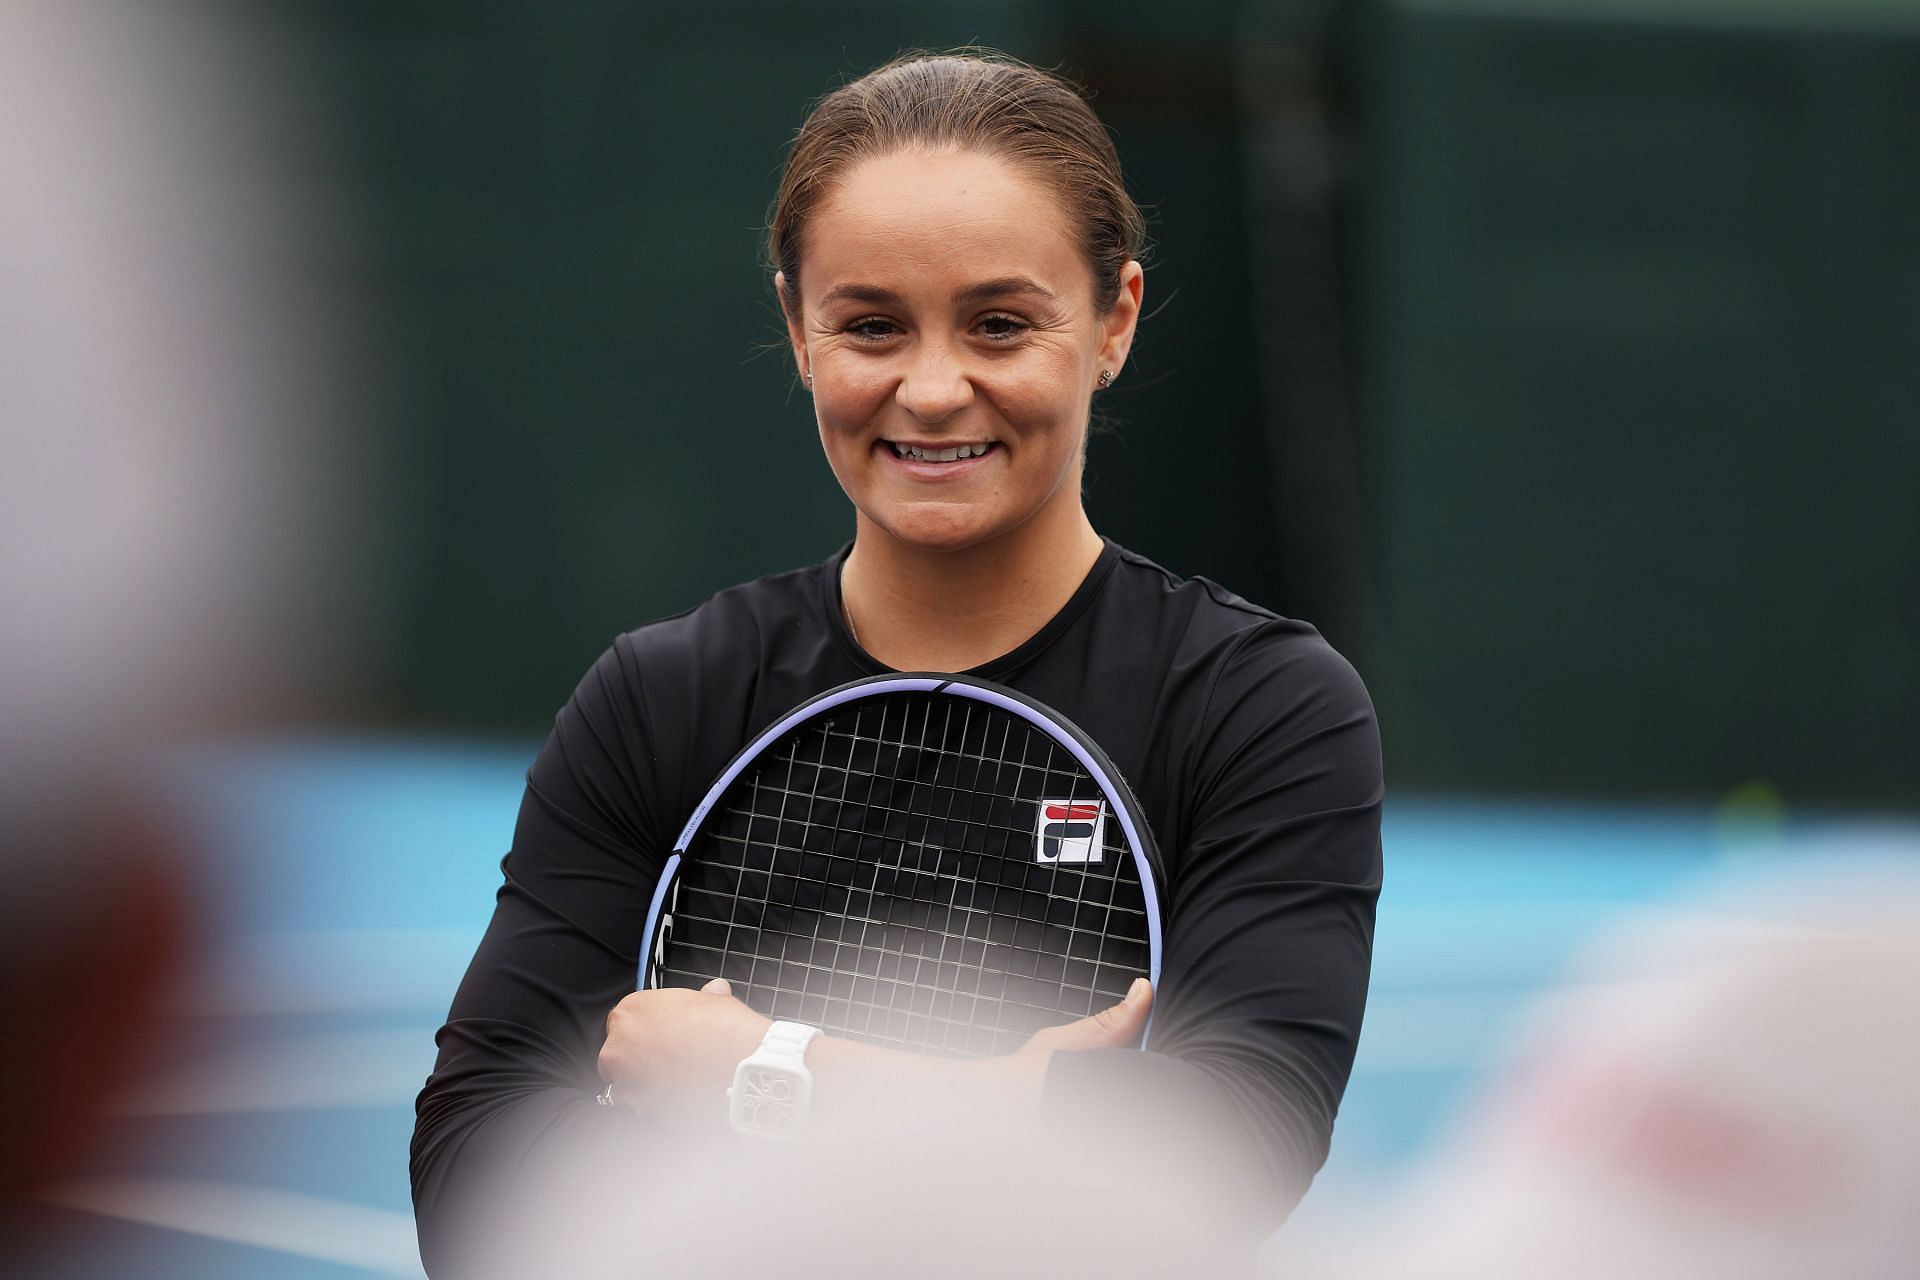 Ashleigh Barty smiles as she attends a media opportunity at Kooyong in Melbourne